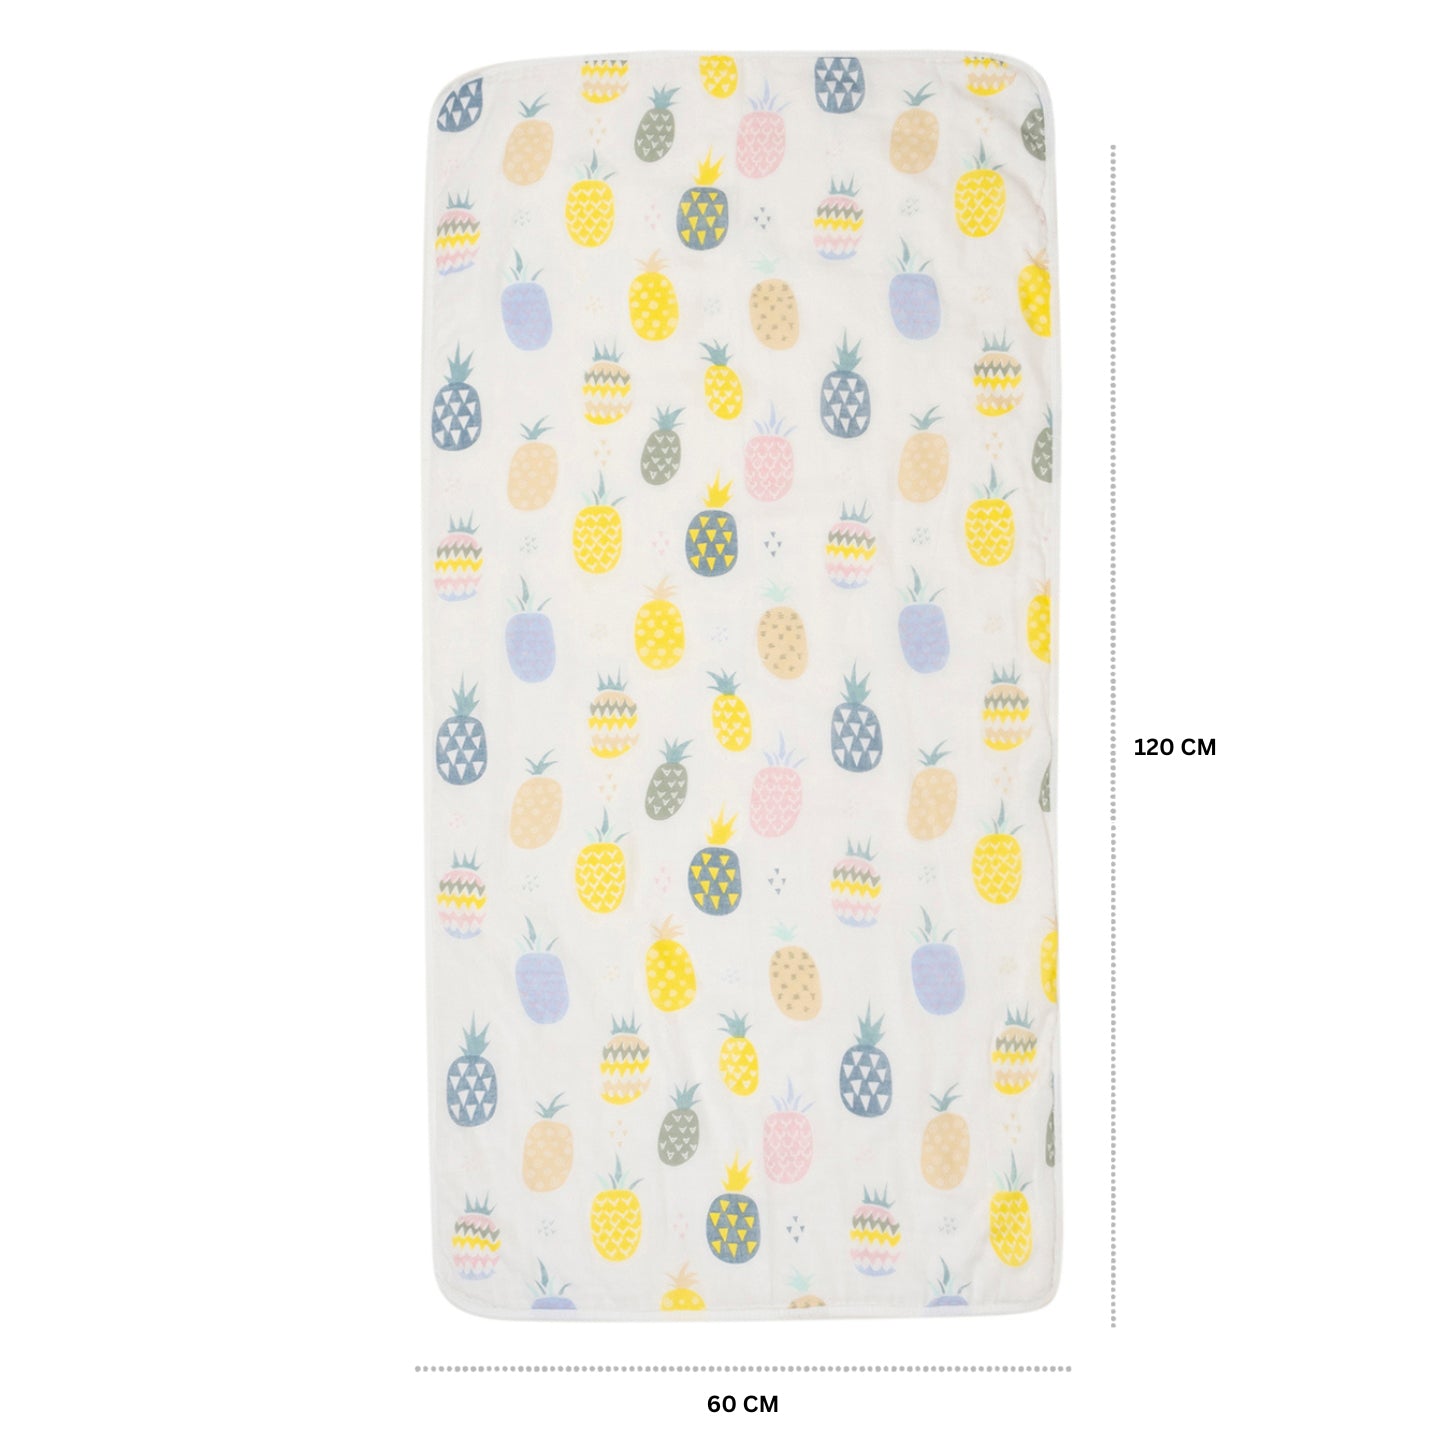 Baby Moo Pineapple 100% Cotton Ultra Soft Eco Friendly Absorbent Premium Bath Towel - White